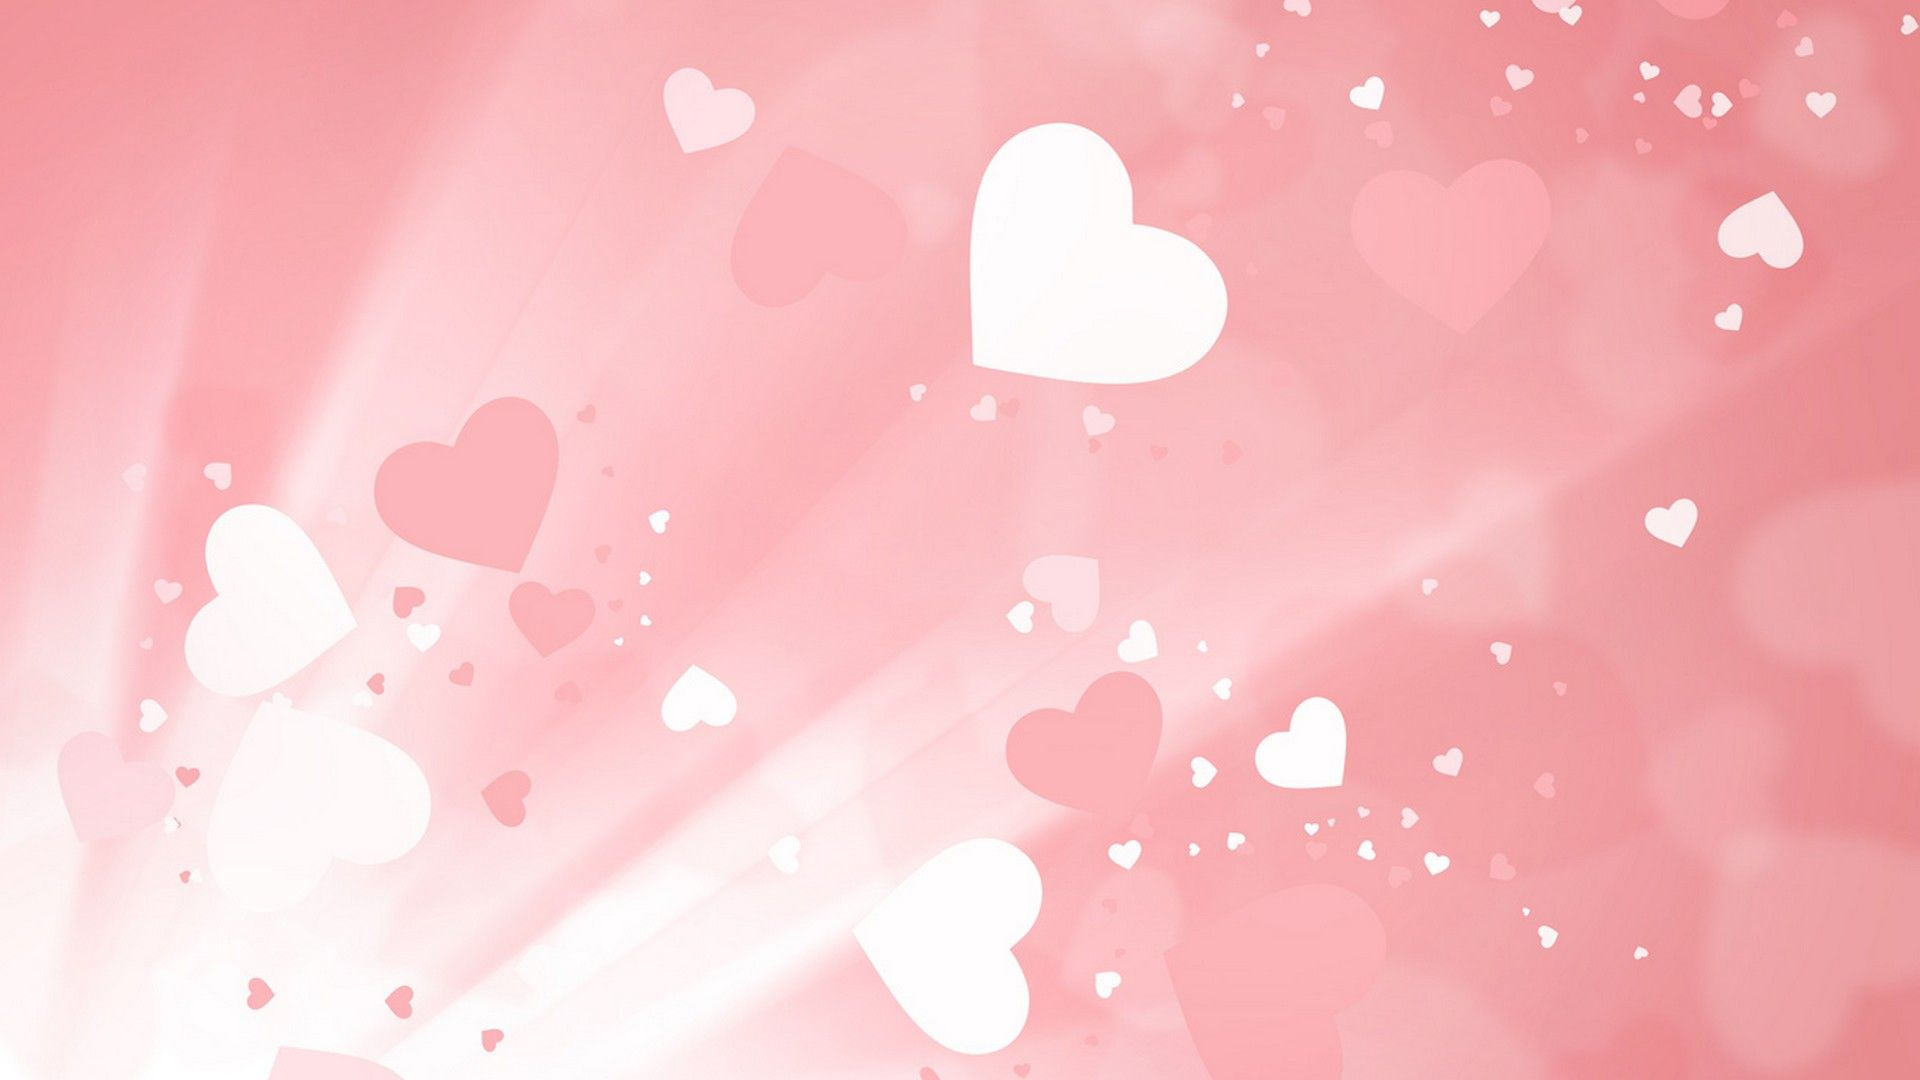 1920x1080 HD Valentines Day Background Live Wallpaper HD | Valentine background, Valentines day background, Valentine day wallpaper hd